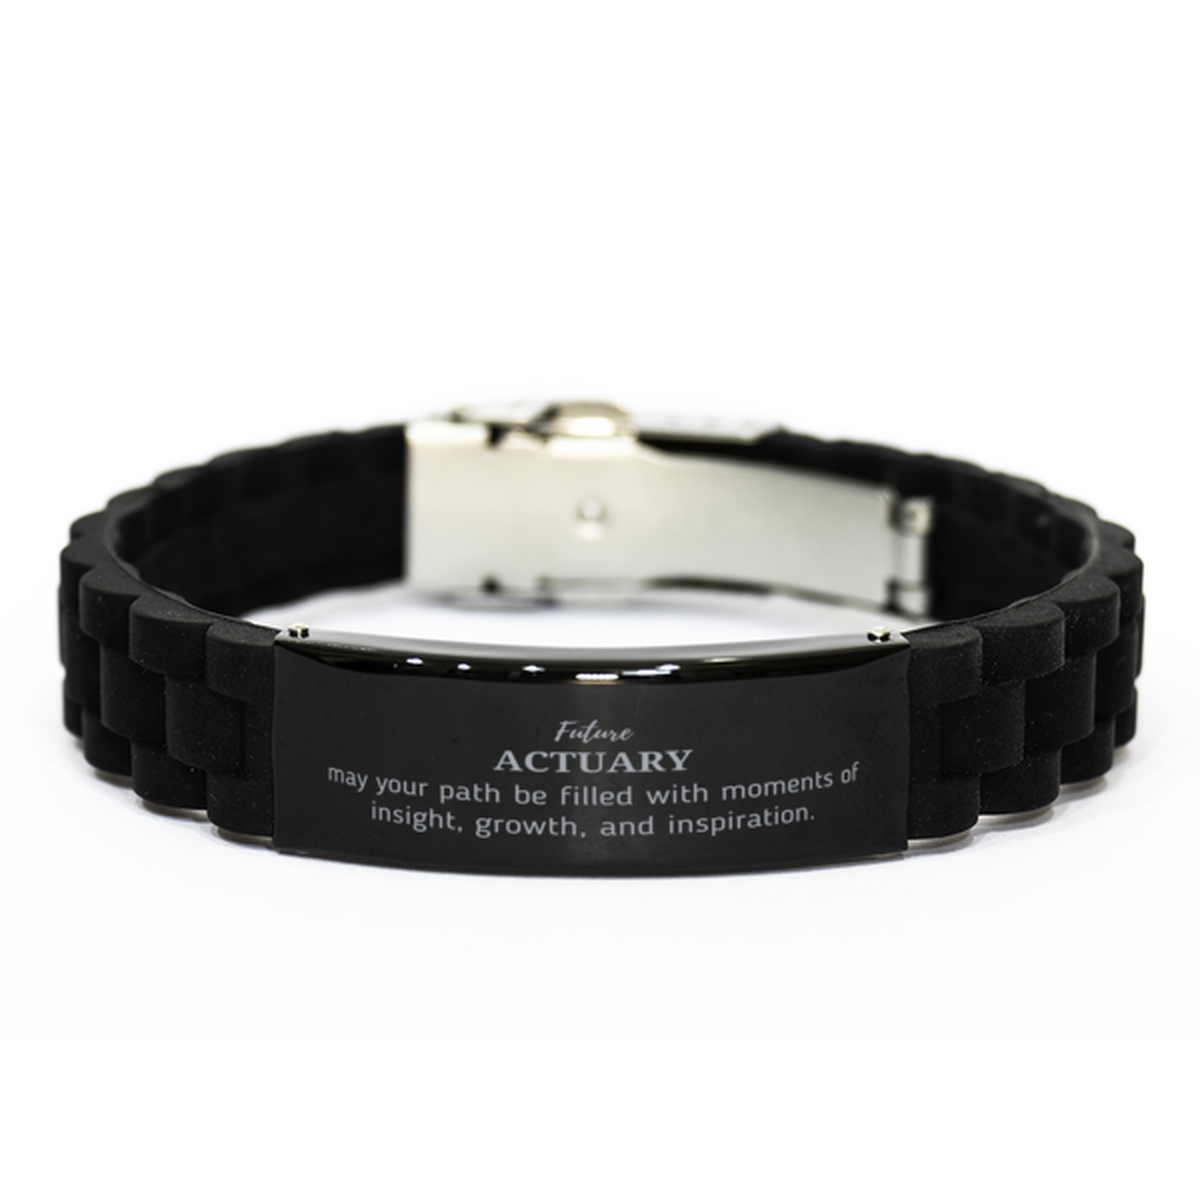 Future Actuary Gifts, May your path be filled with moments of insight, Graduation Gifts for New Actuary, Christmas Unique Black Glidelock Clasp Bracelet For Men, Women, Friends